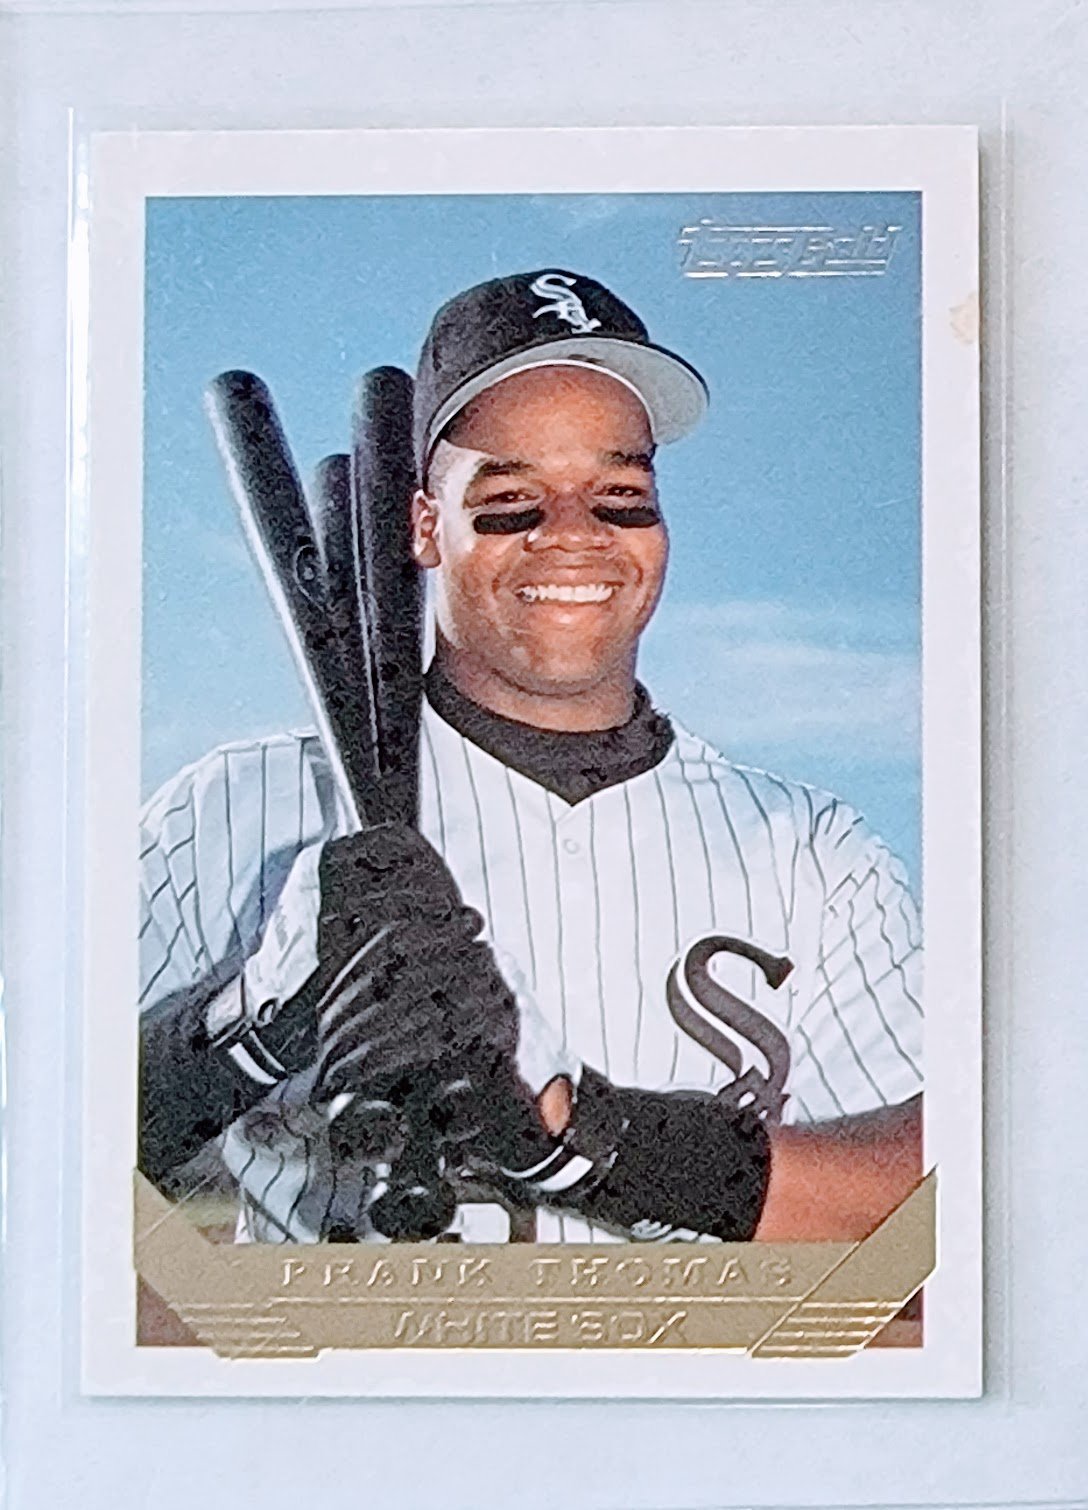 1993 Topps Frank Thomas Gold G-VG Baseball Trading Card TPTV simple Xclusive Collectibles   